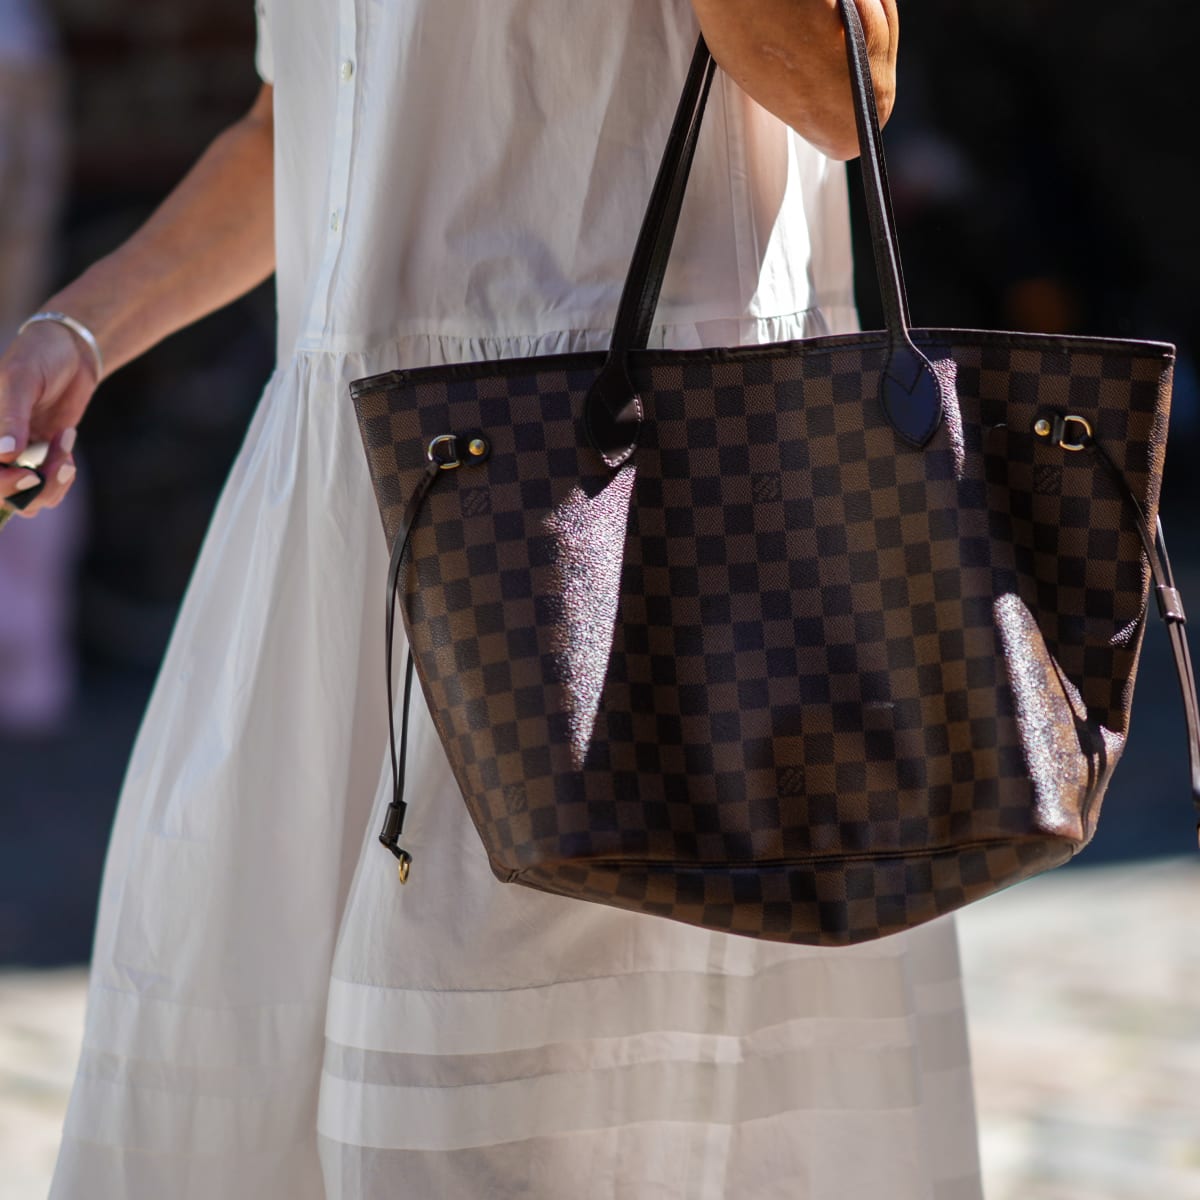 Best Designer Handbags to Invest in Now: 12 Luxury Bags for Any Budget